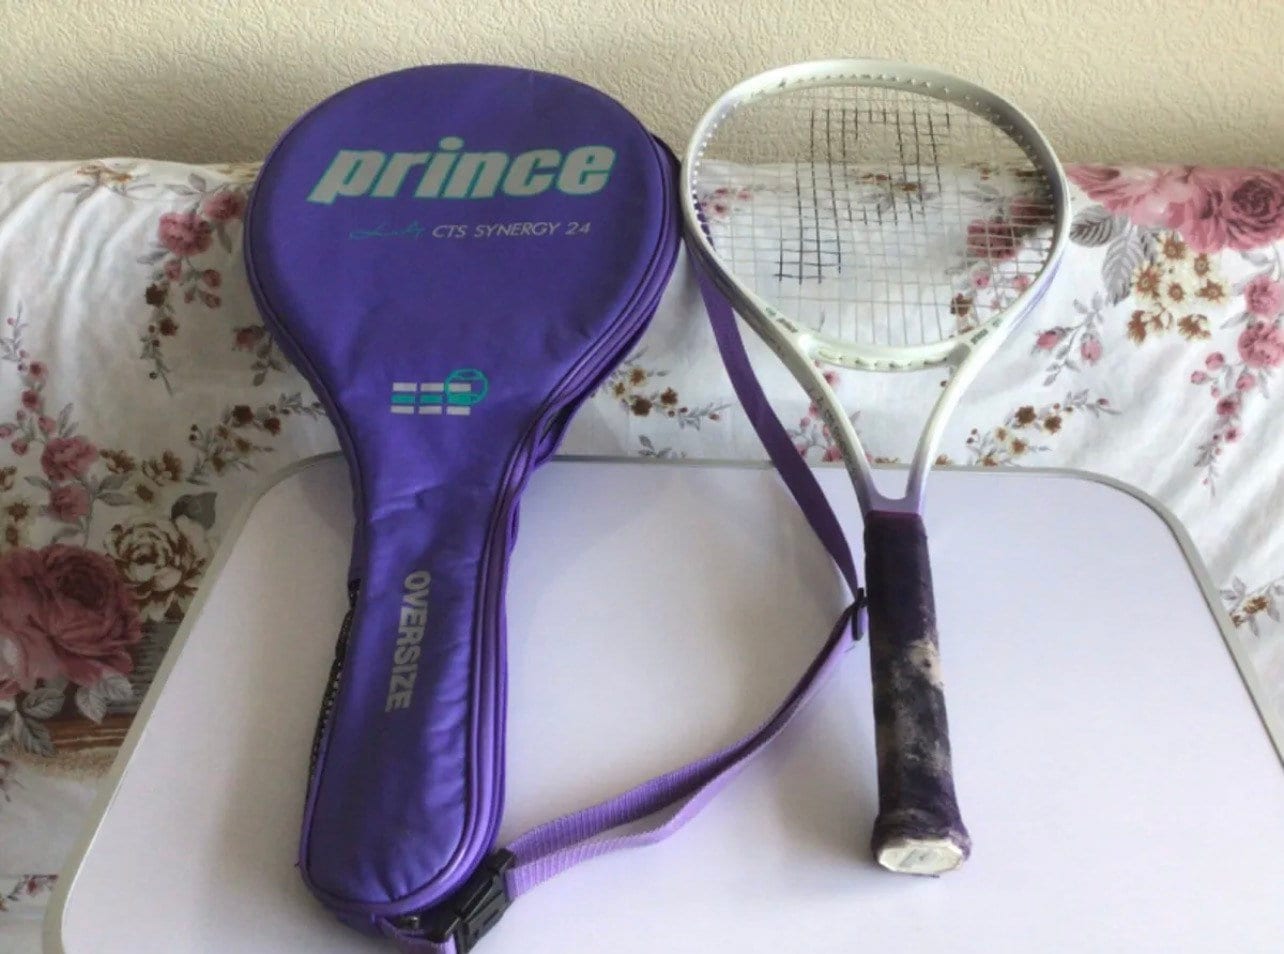 Tennis Racquet Grip Neck Bands, Cover the Top of Your Racket Grip